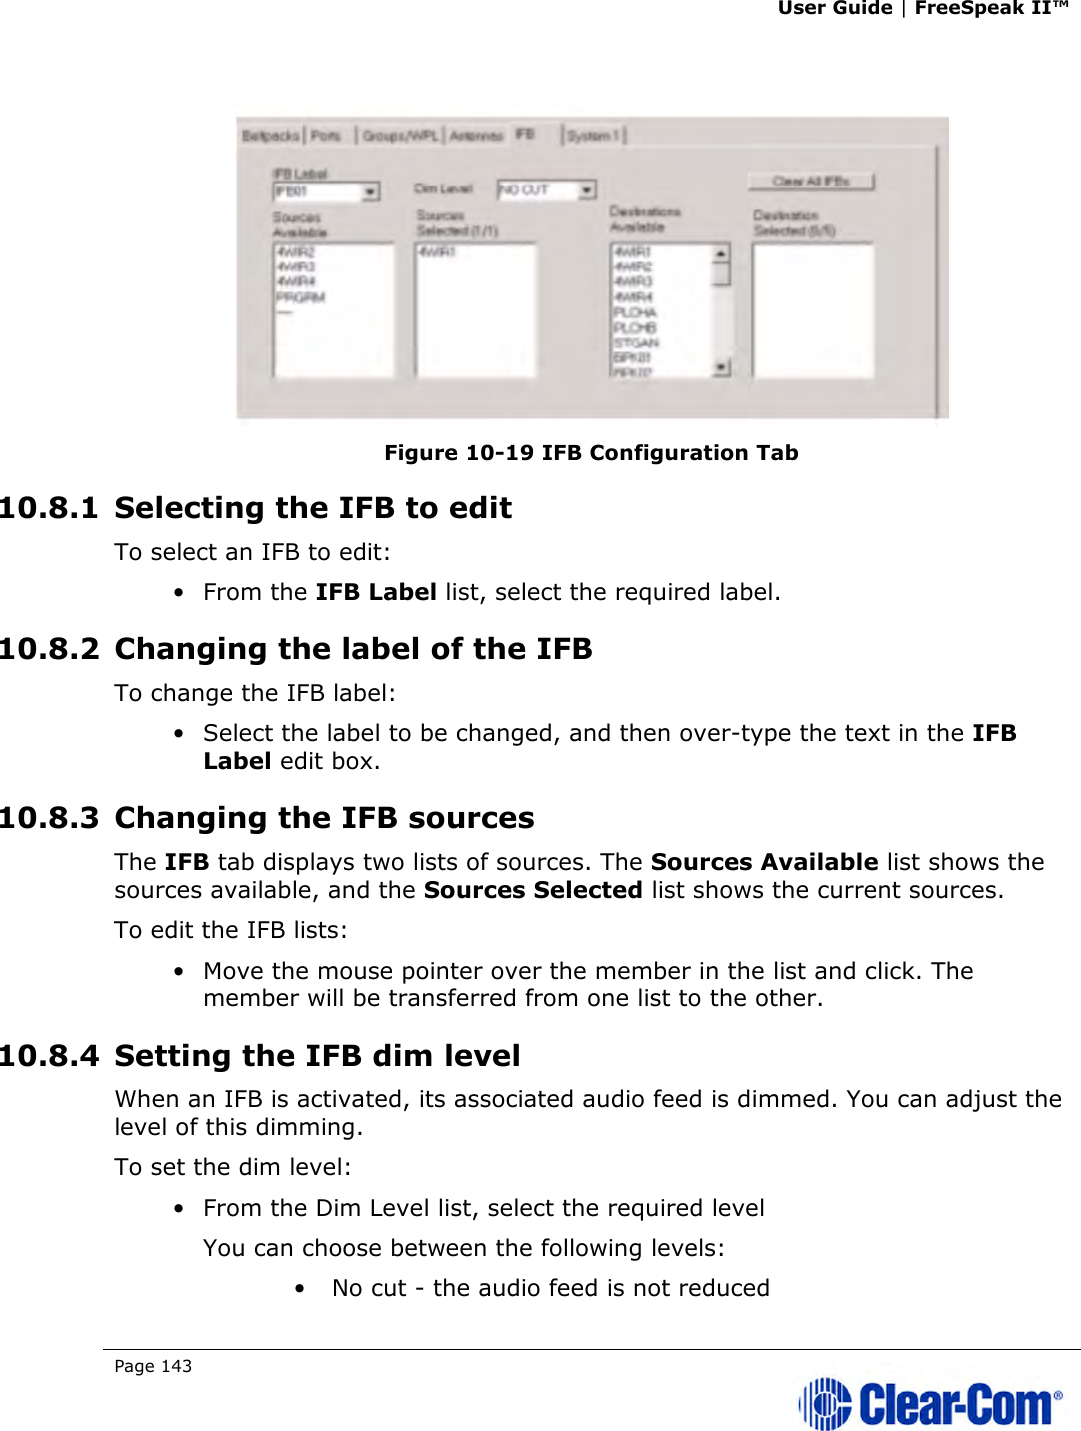 User Guide | FreeSpeak II™  Page 143     Figure 10-19 IFB Configuration Tab 10.8.1 Selecting the IFB to edit To select an IFB to edit: • From the IFB Label list, select the required label. 10.8.2 Changing the label of the IFB To change the IFB label: • Select the label to be changed, and then over-type the text in the IFB Label edit box. 10.8.3 Changing the IFB sources The IFB tab displays two lists of sources. The Sources Available list shows the sources available, and the Sources Selected list shows the current sources. To edit the IFB lists: • Move the mouse pointer over the member in the list and click. The member will be transferred from one list to the other. 10.8.4 Setting the IFB dim level When an IFB is activated, its associated audio feed is dimmed. You can adjust the level of this dimming. To set the dim level: • From the Dim Level list, select the required level You can choose between the following levels: • No cut - the audio feed is not reduced 